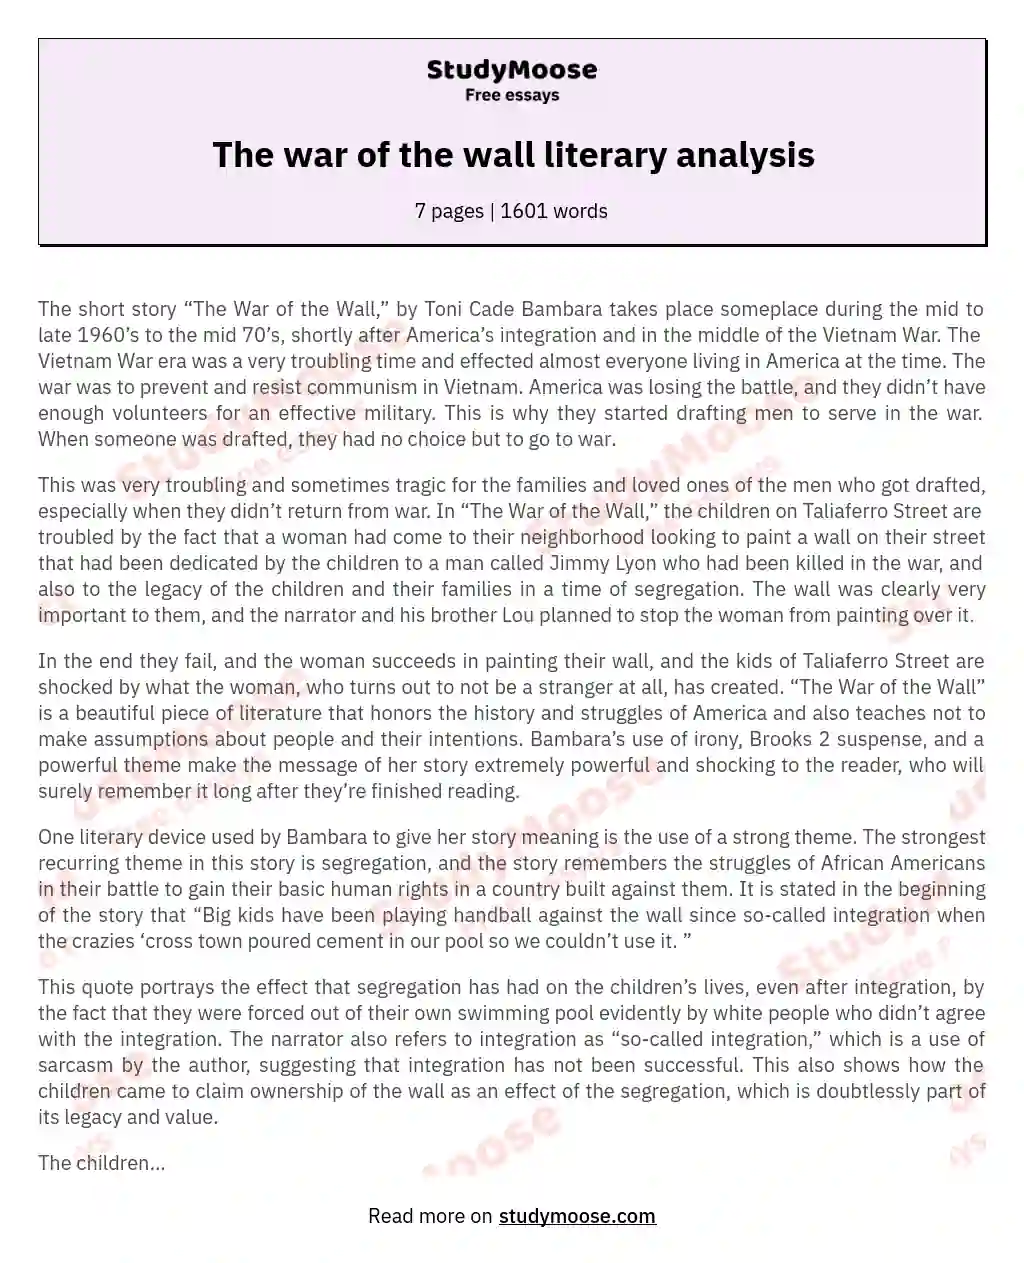 The war of the wall literary analysis essay